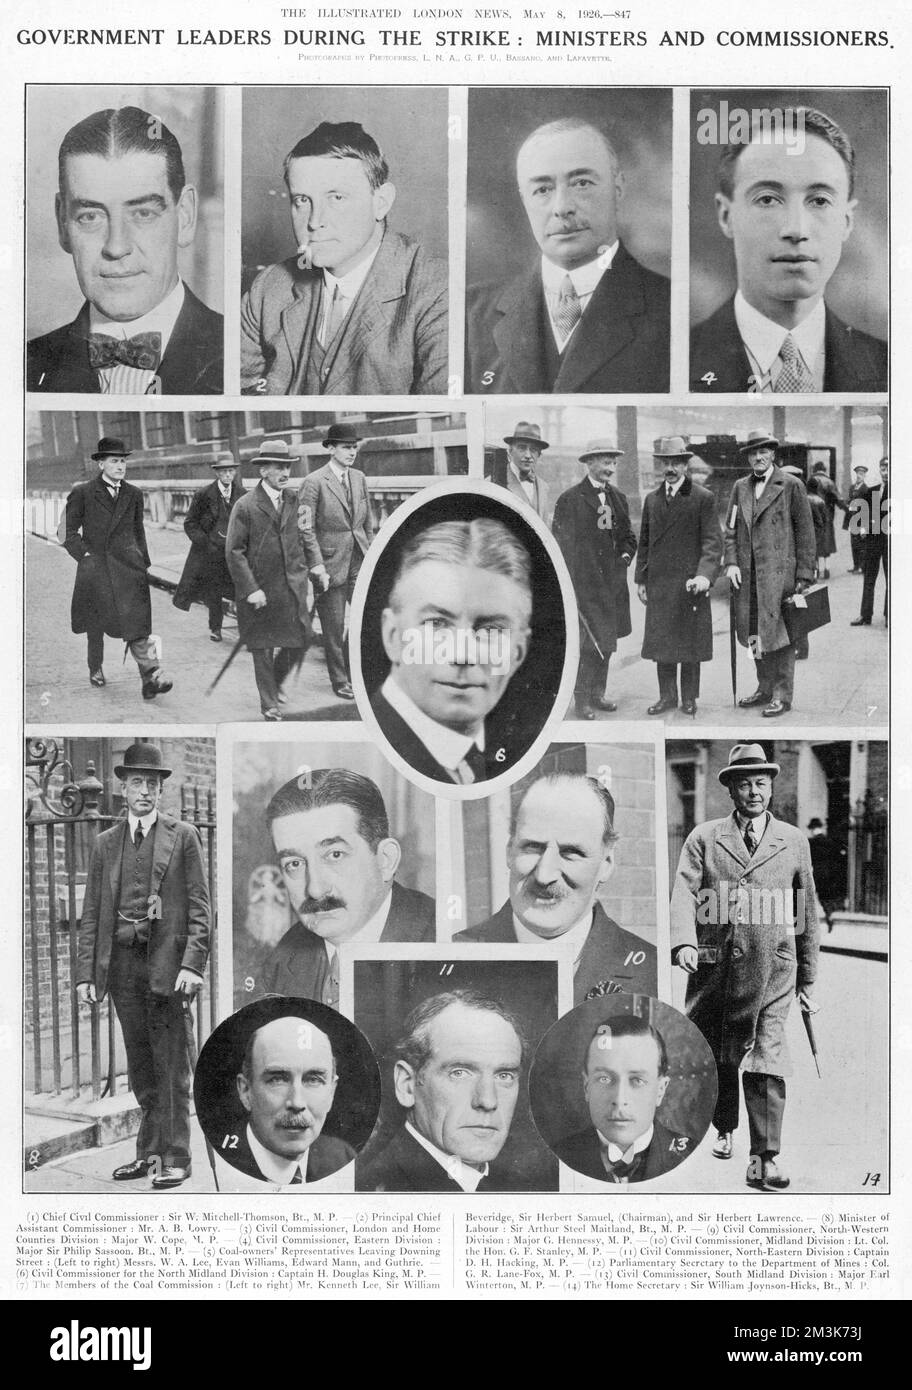 Government leaders during the General Strike: Ministers and Commissioners. 1. Chief Civil Commissioner: Sir W. Mitchell-Thomson, 2. Principal Chief Assistant Commissioner, Mr. A. B. Lowry, 3. Civil Commissioner, London and Home Counties Division: Major W. Cope, 4. Civil Commissioner, Eastern Division: Major Sir Philip Sassoon, 5. Coal-owner's representatives leaving Downing Street: (Left to right) Messrs. W. A. Lee, Evan Williams, Edward Mann, and Guthrie. 6. Civil Commissioner for the North Midland Division: Captain H. Douglas King, 7. The Members of the Coal Commission: (Left to right) Mr. Stock Photo